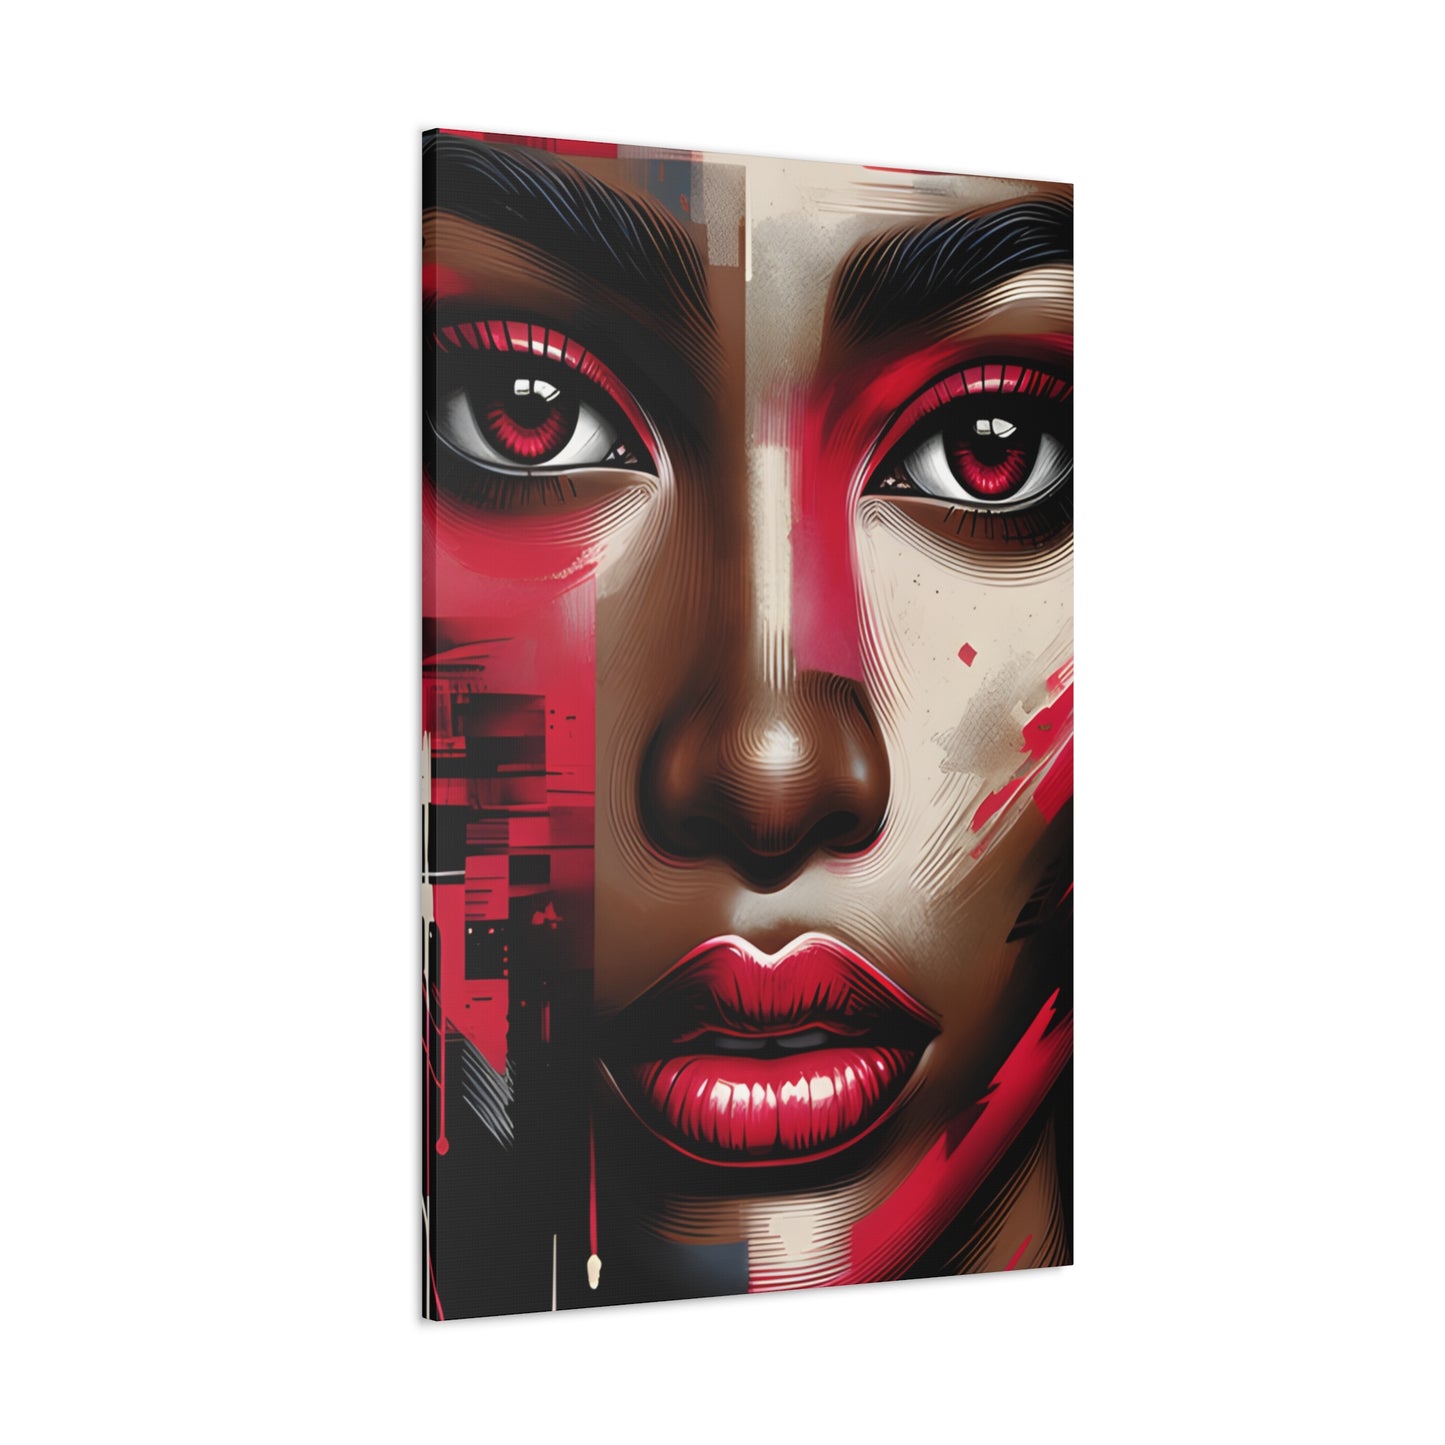 Digital portrait of an African American woman with striking red and pink hues on her face, dramatic red eyeshadow, and a captivating gaze, set against a street art backdrop with a drip effect. | EbMerized Creations